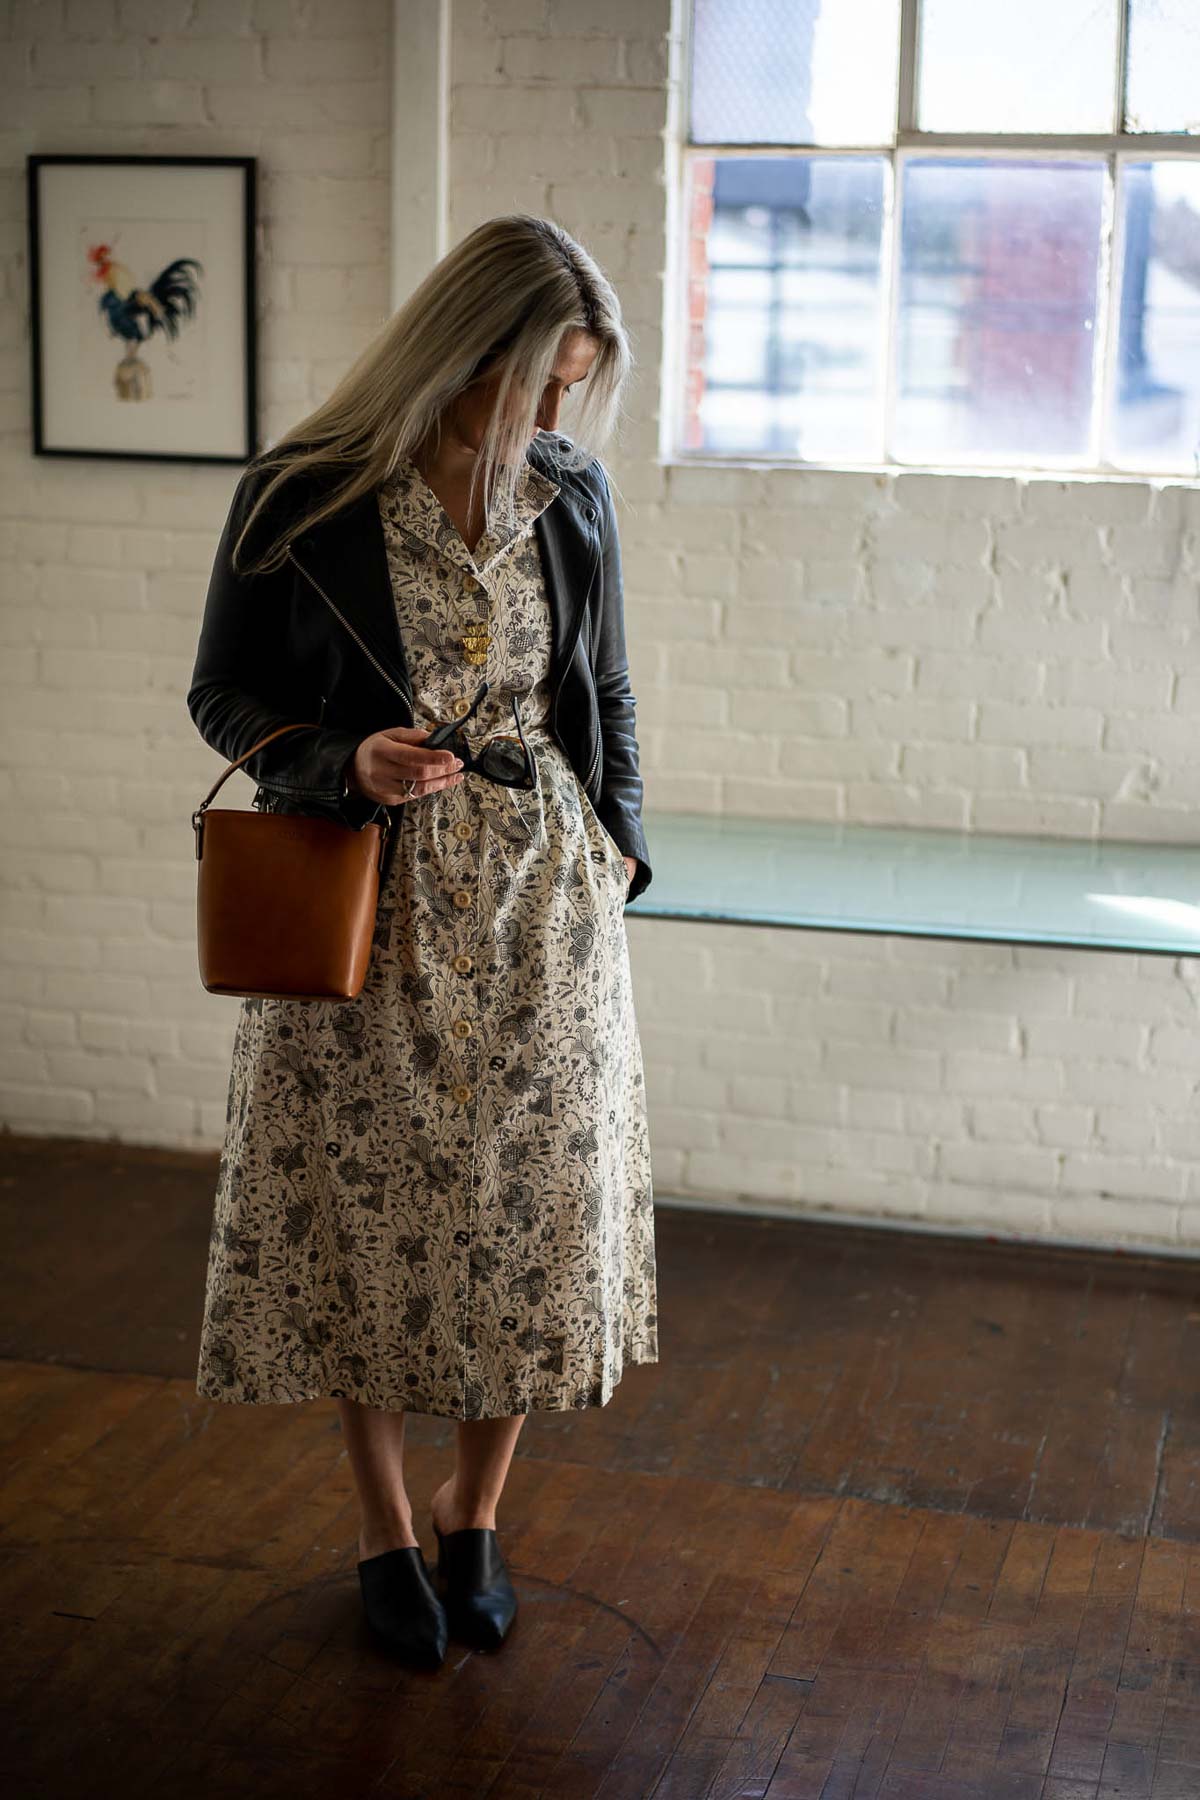 Sustainable Fall Dresses for Women -Black & White Patterned Dress with Leather Jacket and black mules